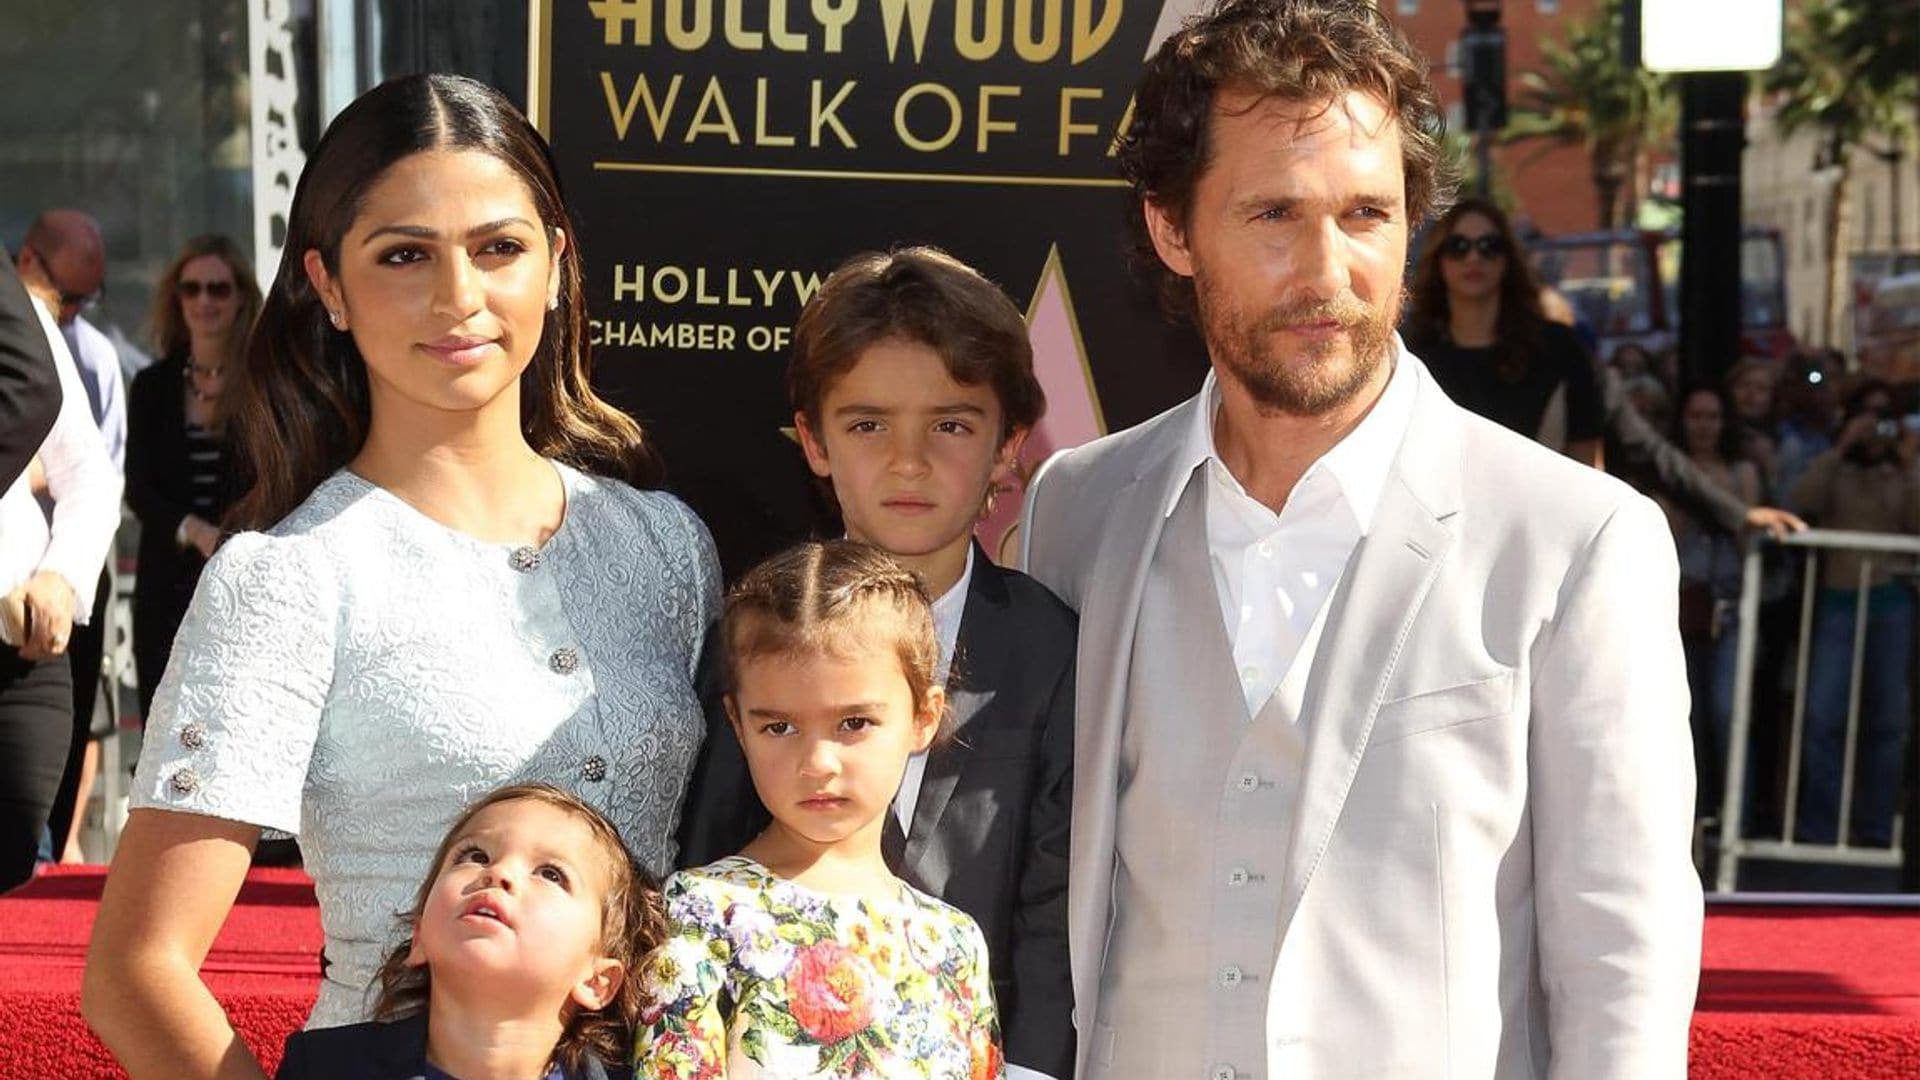 Camila Alves shares the cutest throwback photo proving daughter Vida is her mini-me